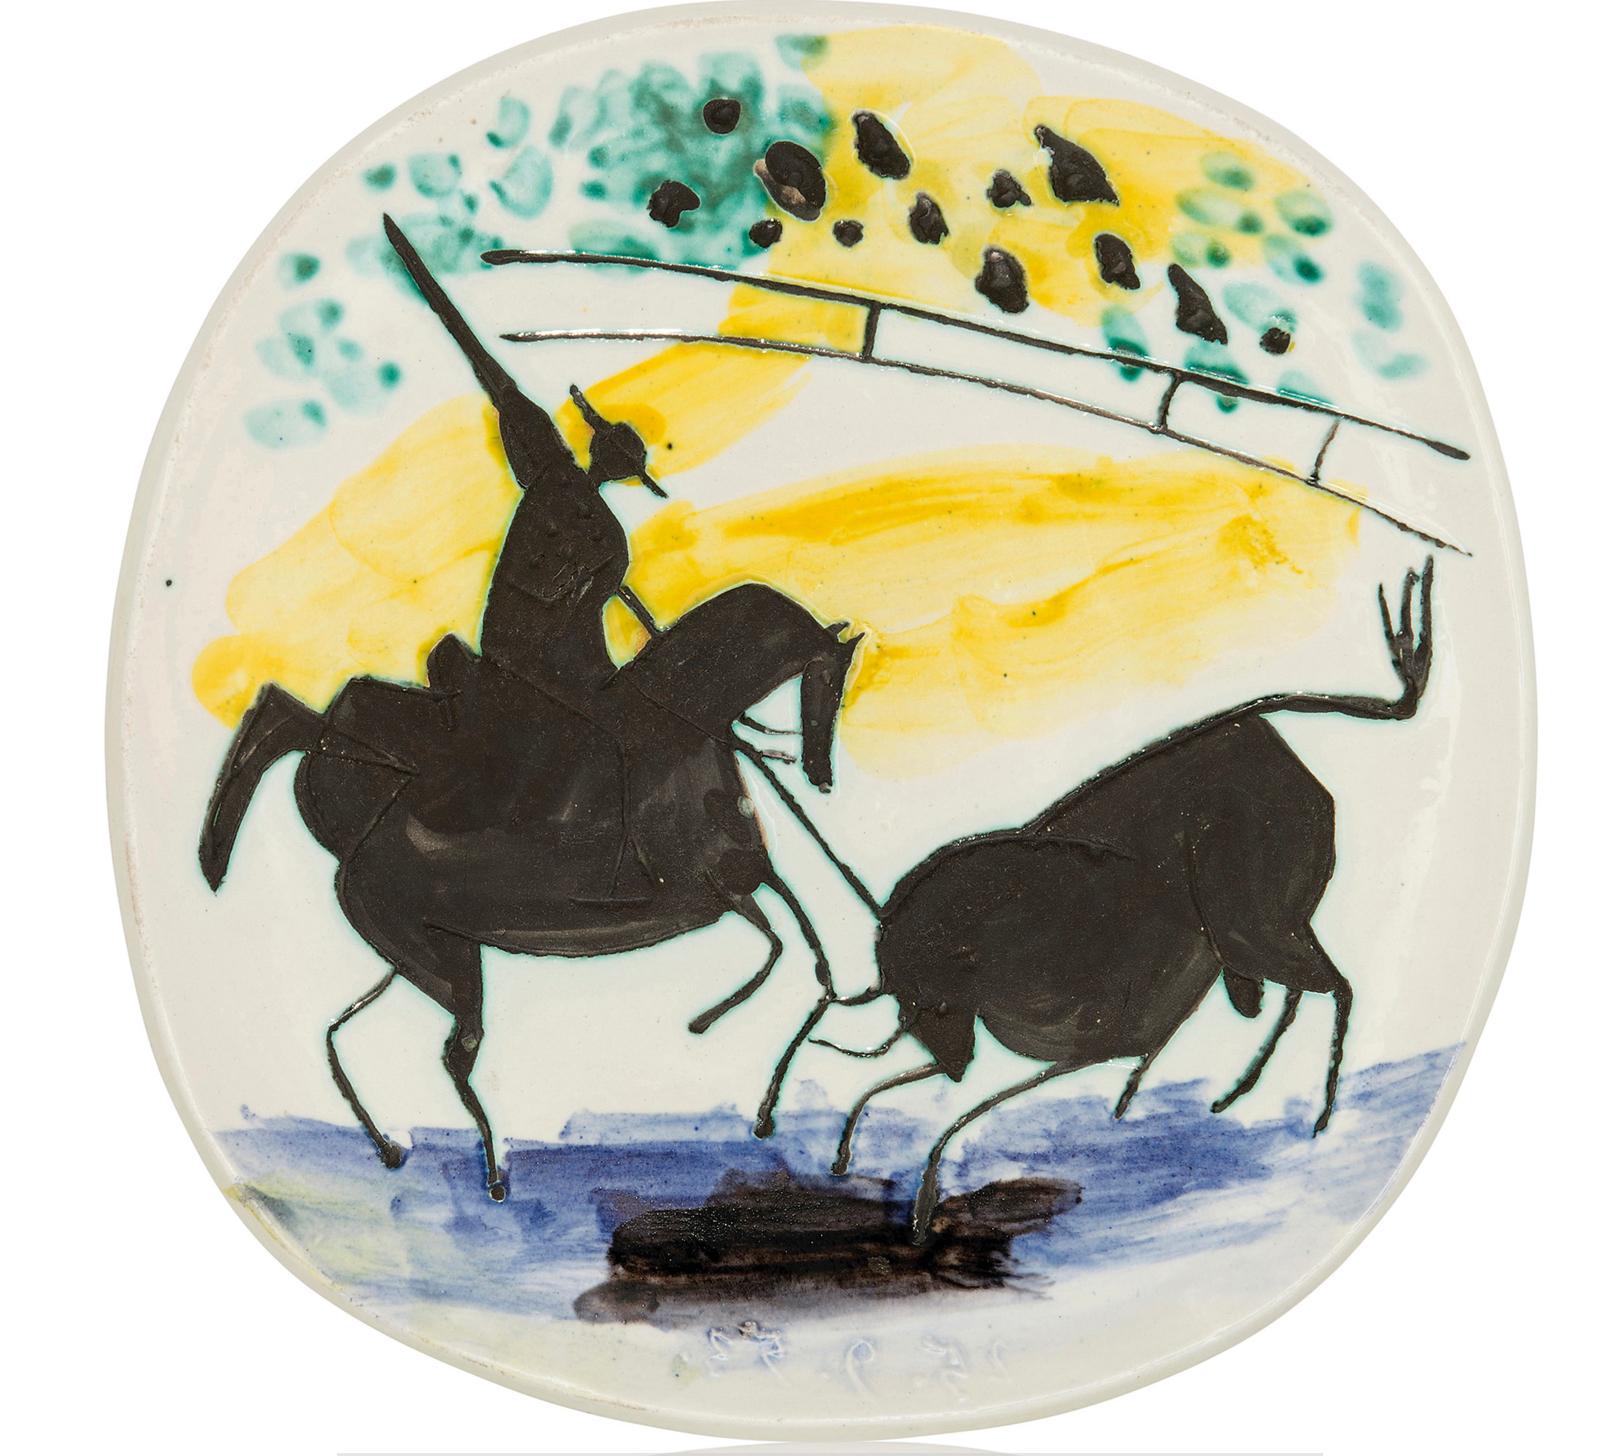 This Picasso ceramic plate "Picador et taureau Ramié 197" is one in an edition of 200 and is made of white earthenware clay, and decorated with colored engobes and glaze. 

Please contact us with any questions.
